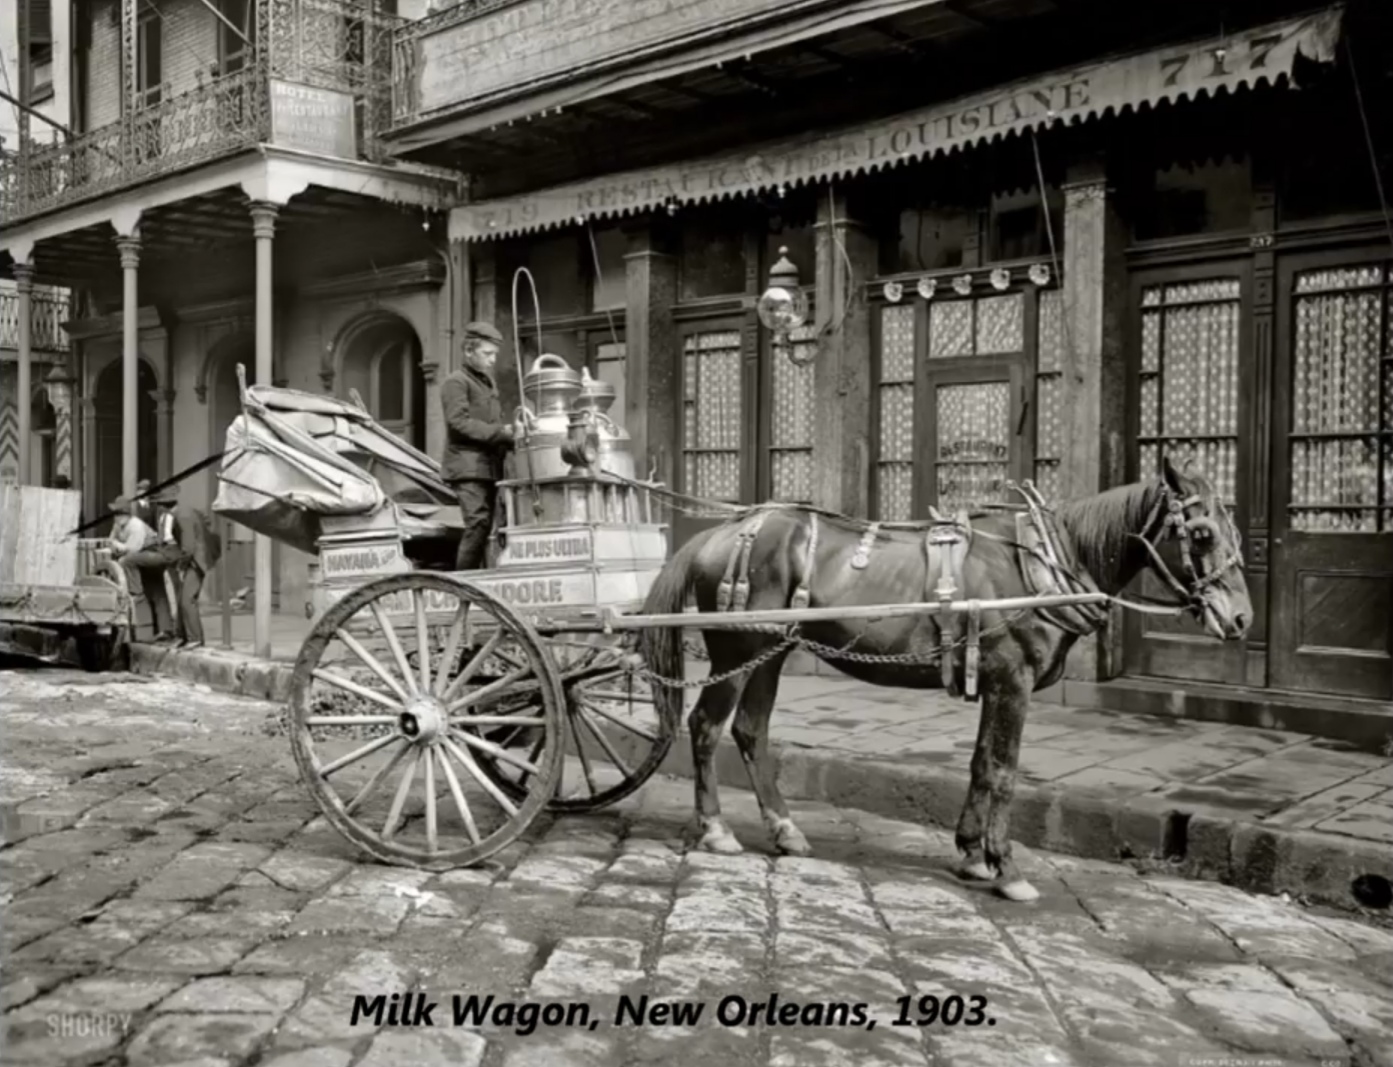 vintage photos of new orleans - Waliste Milk Wagon, New Orleans, 1903.